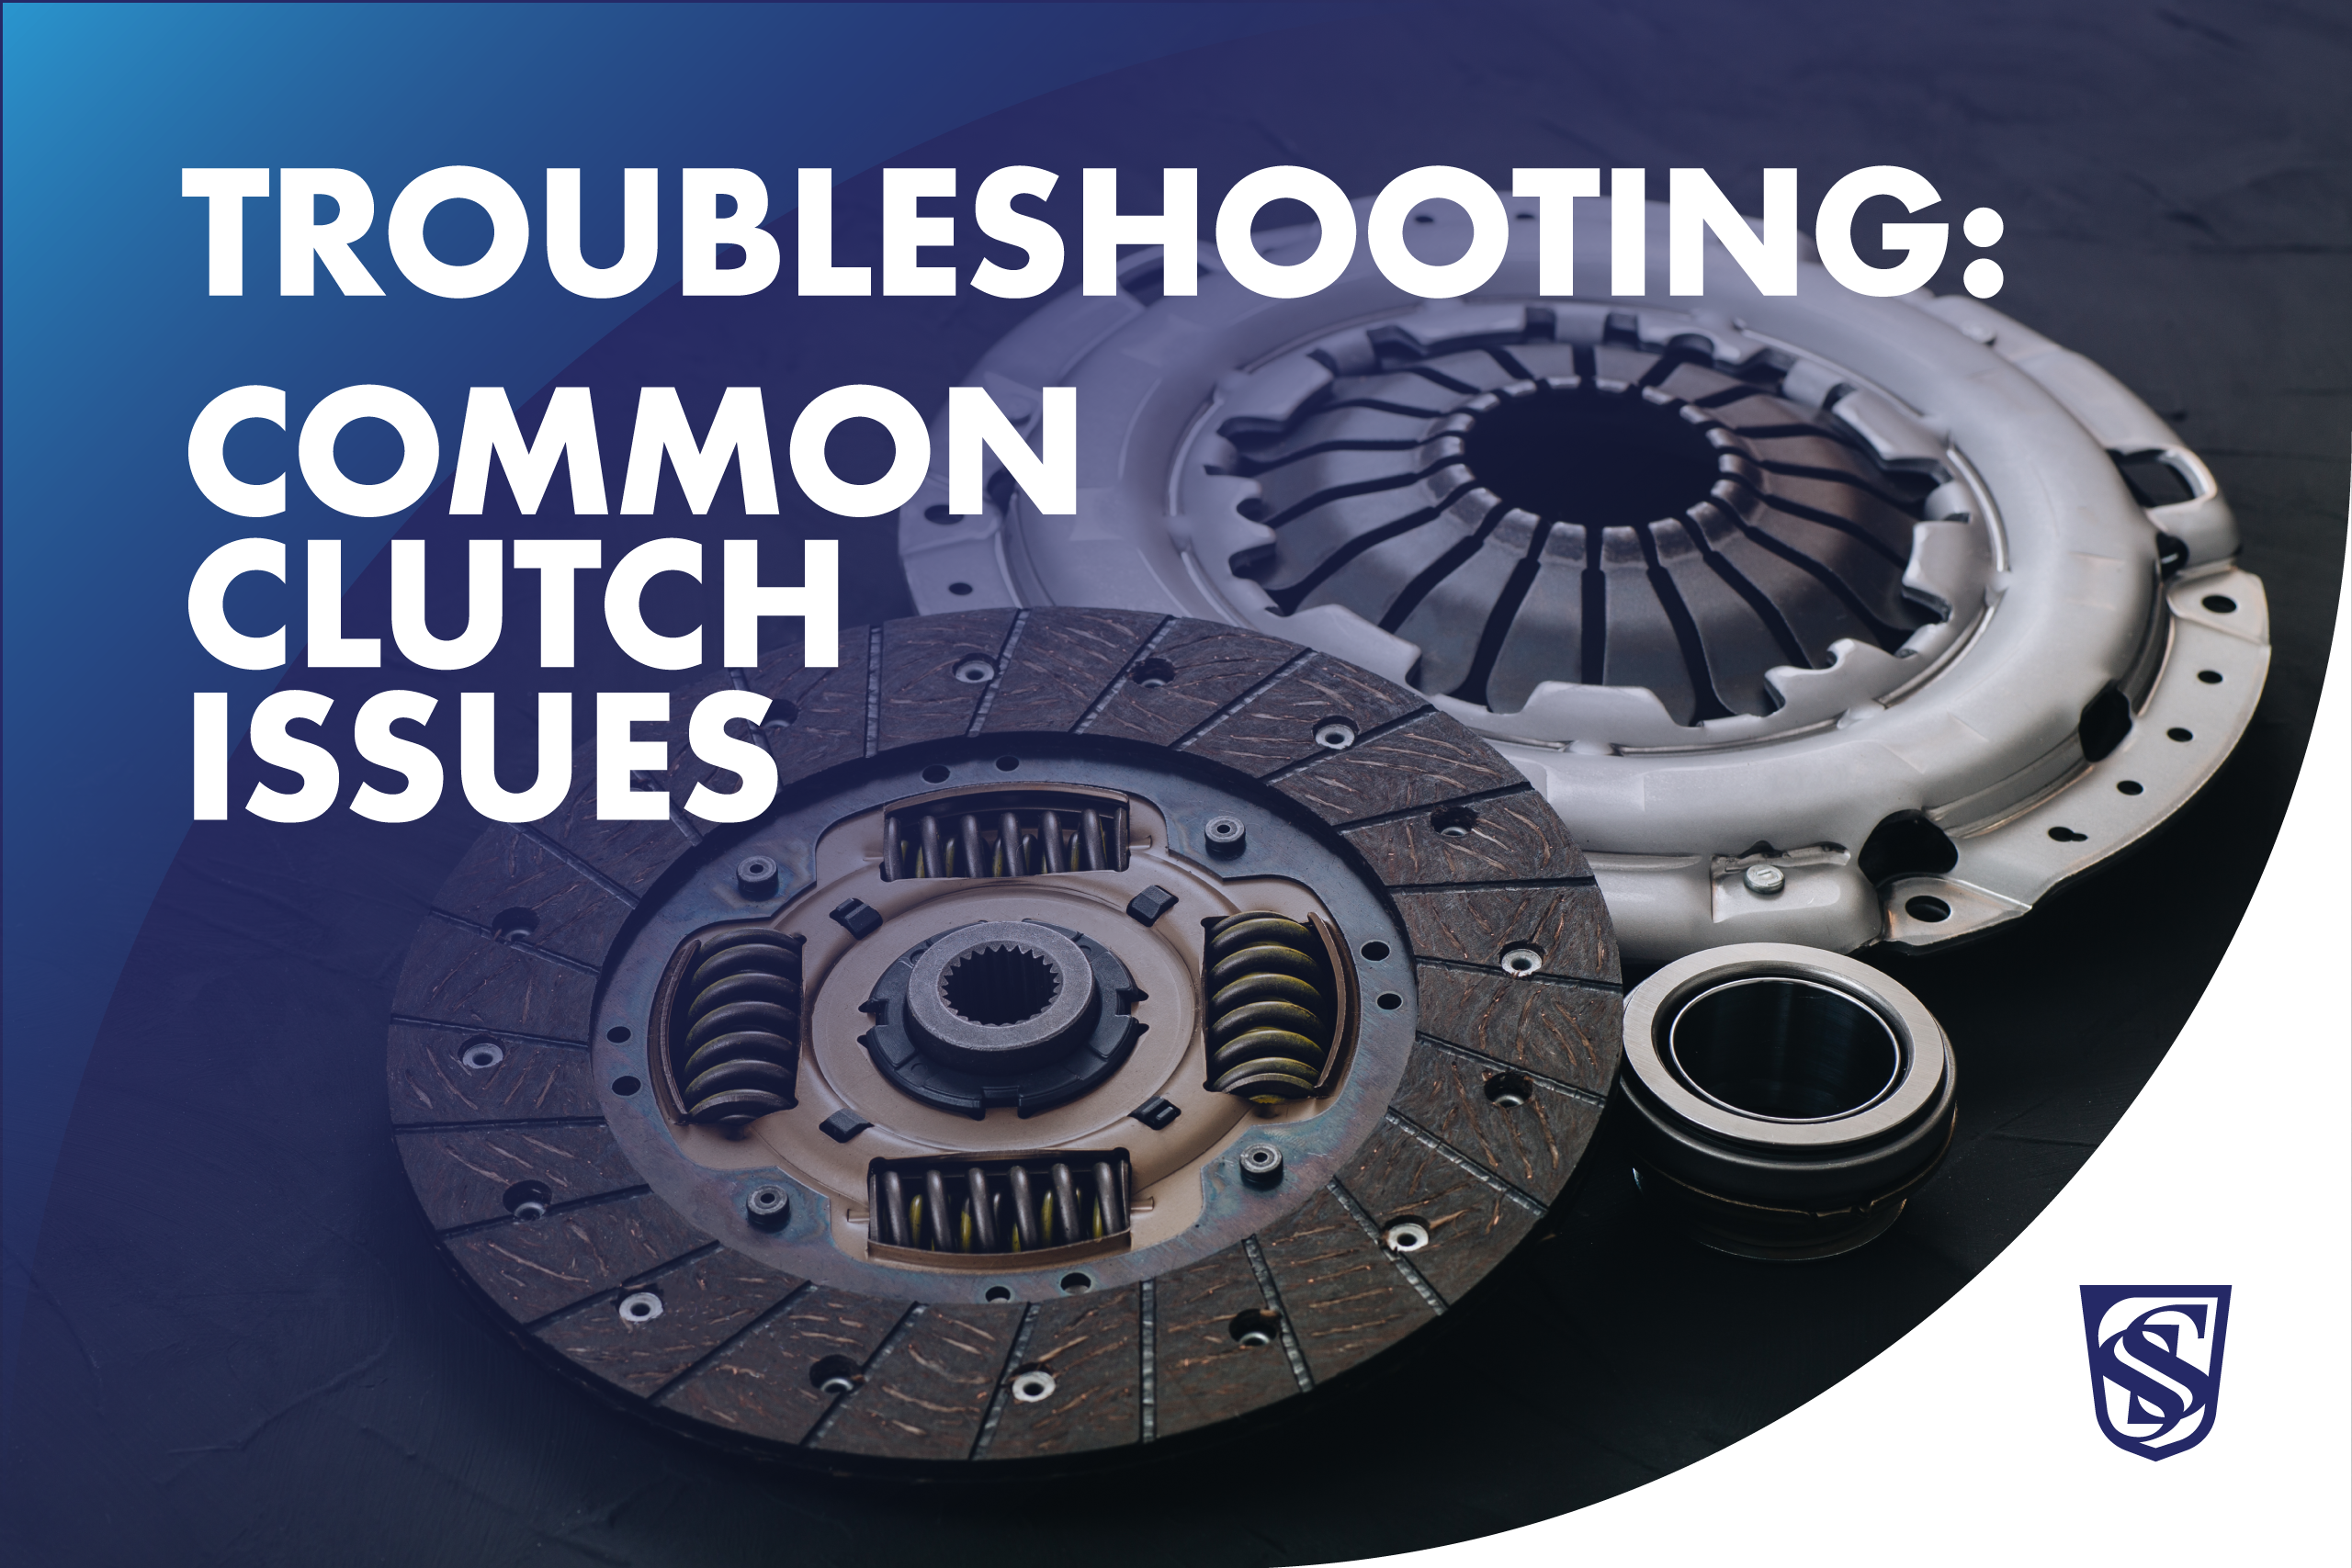 How To Avoid Cluch Plate Damage?എന്തിനാണ് clutch plate മാറ്റുന്നത്?, Reasons  & Solutions